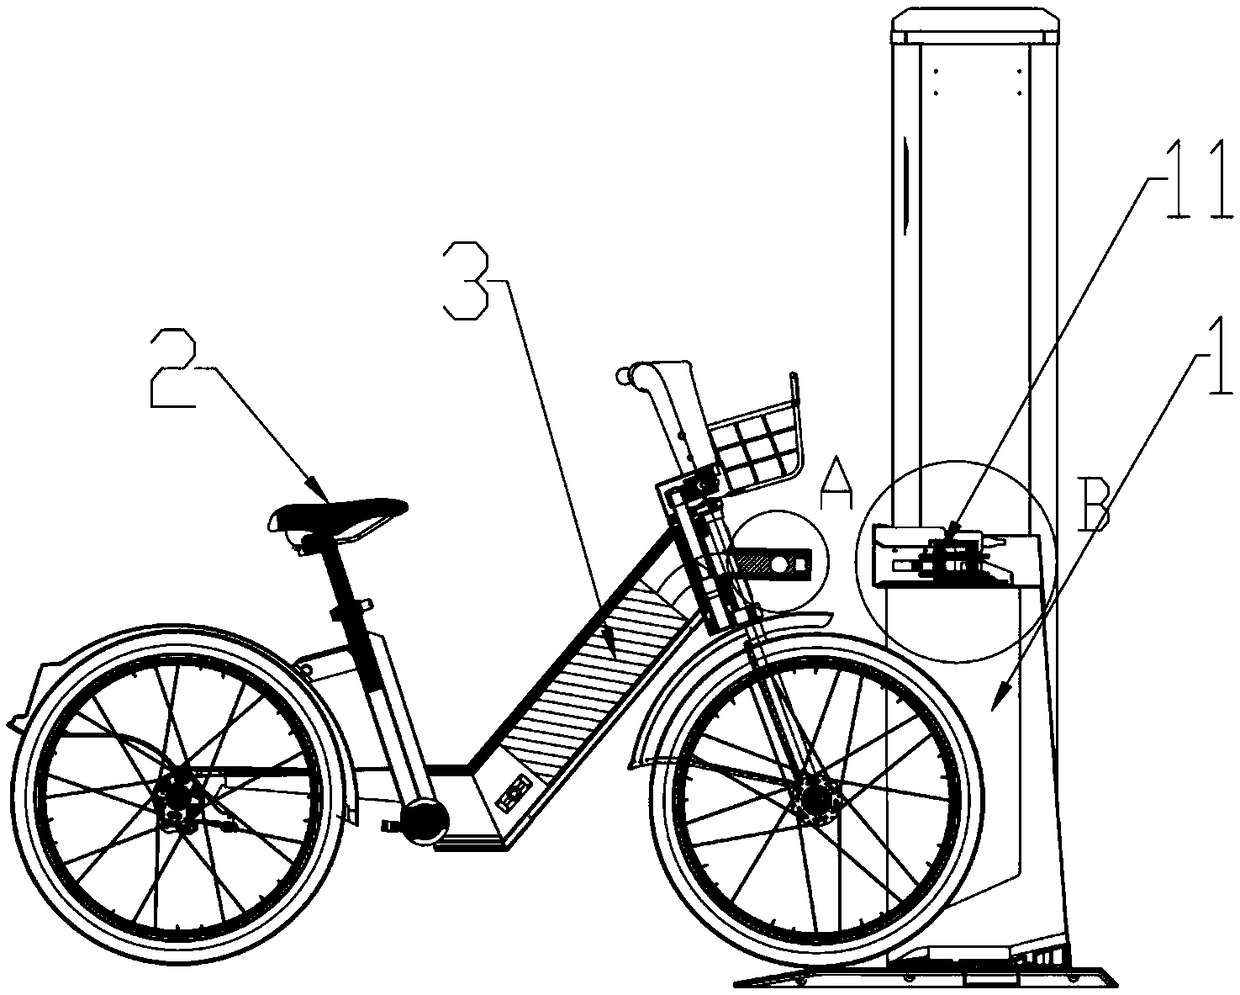 A public electric bicycle